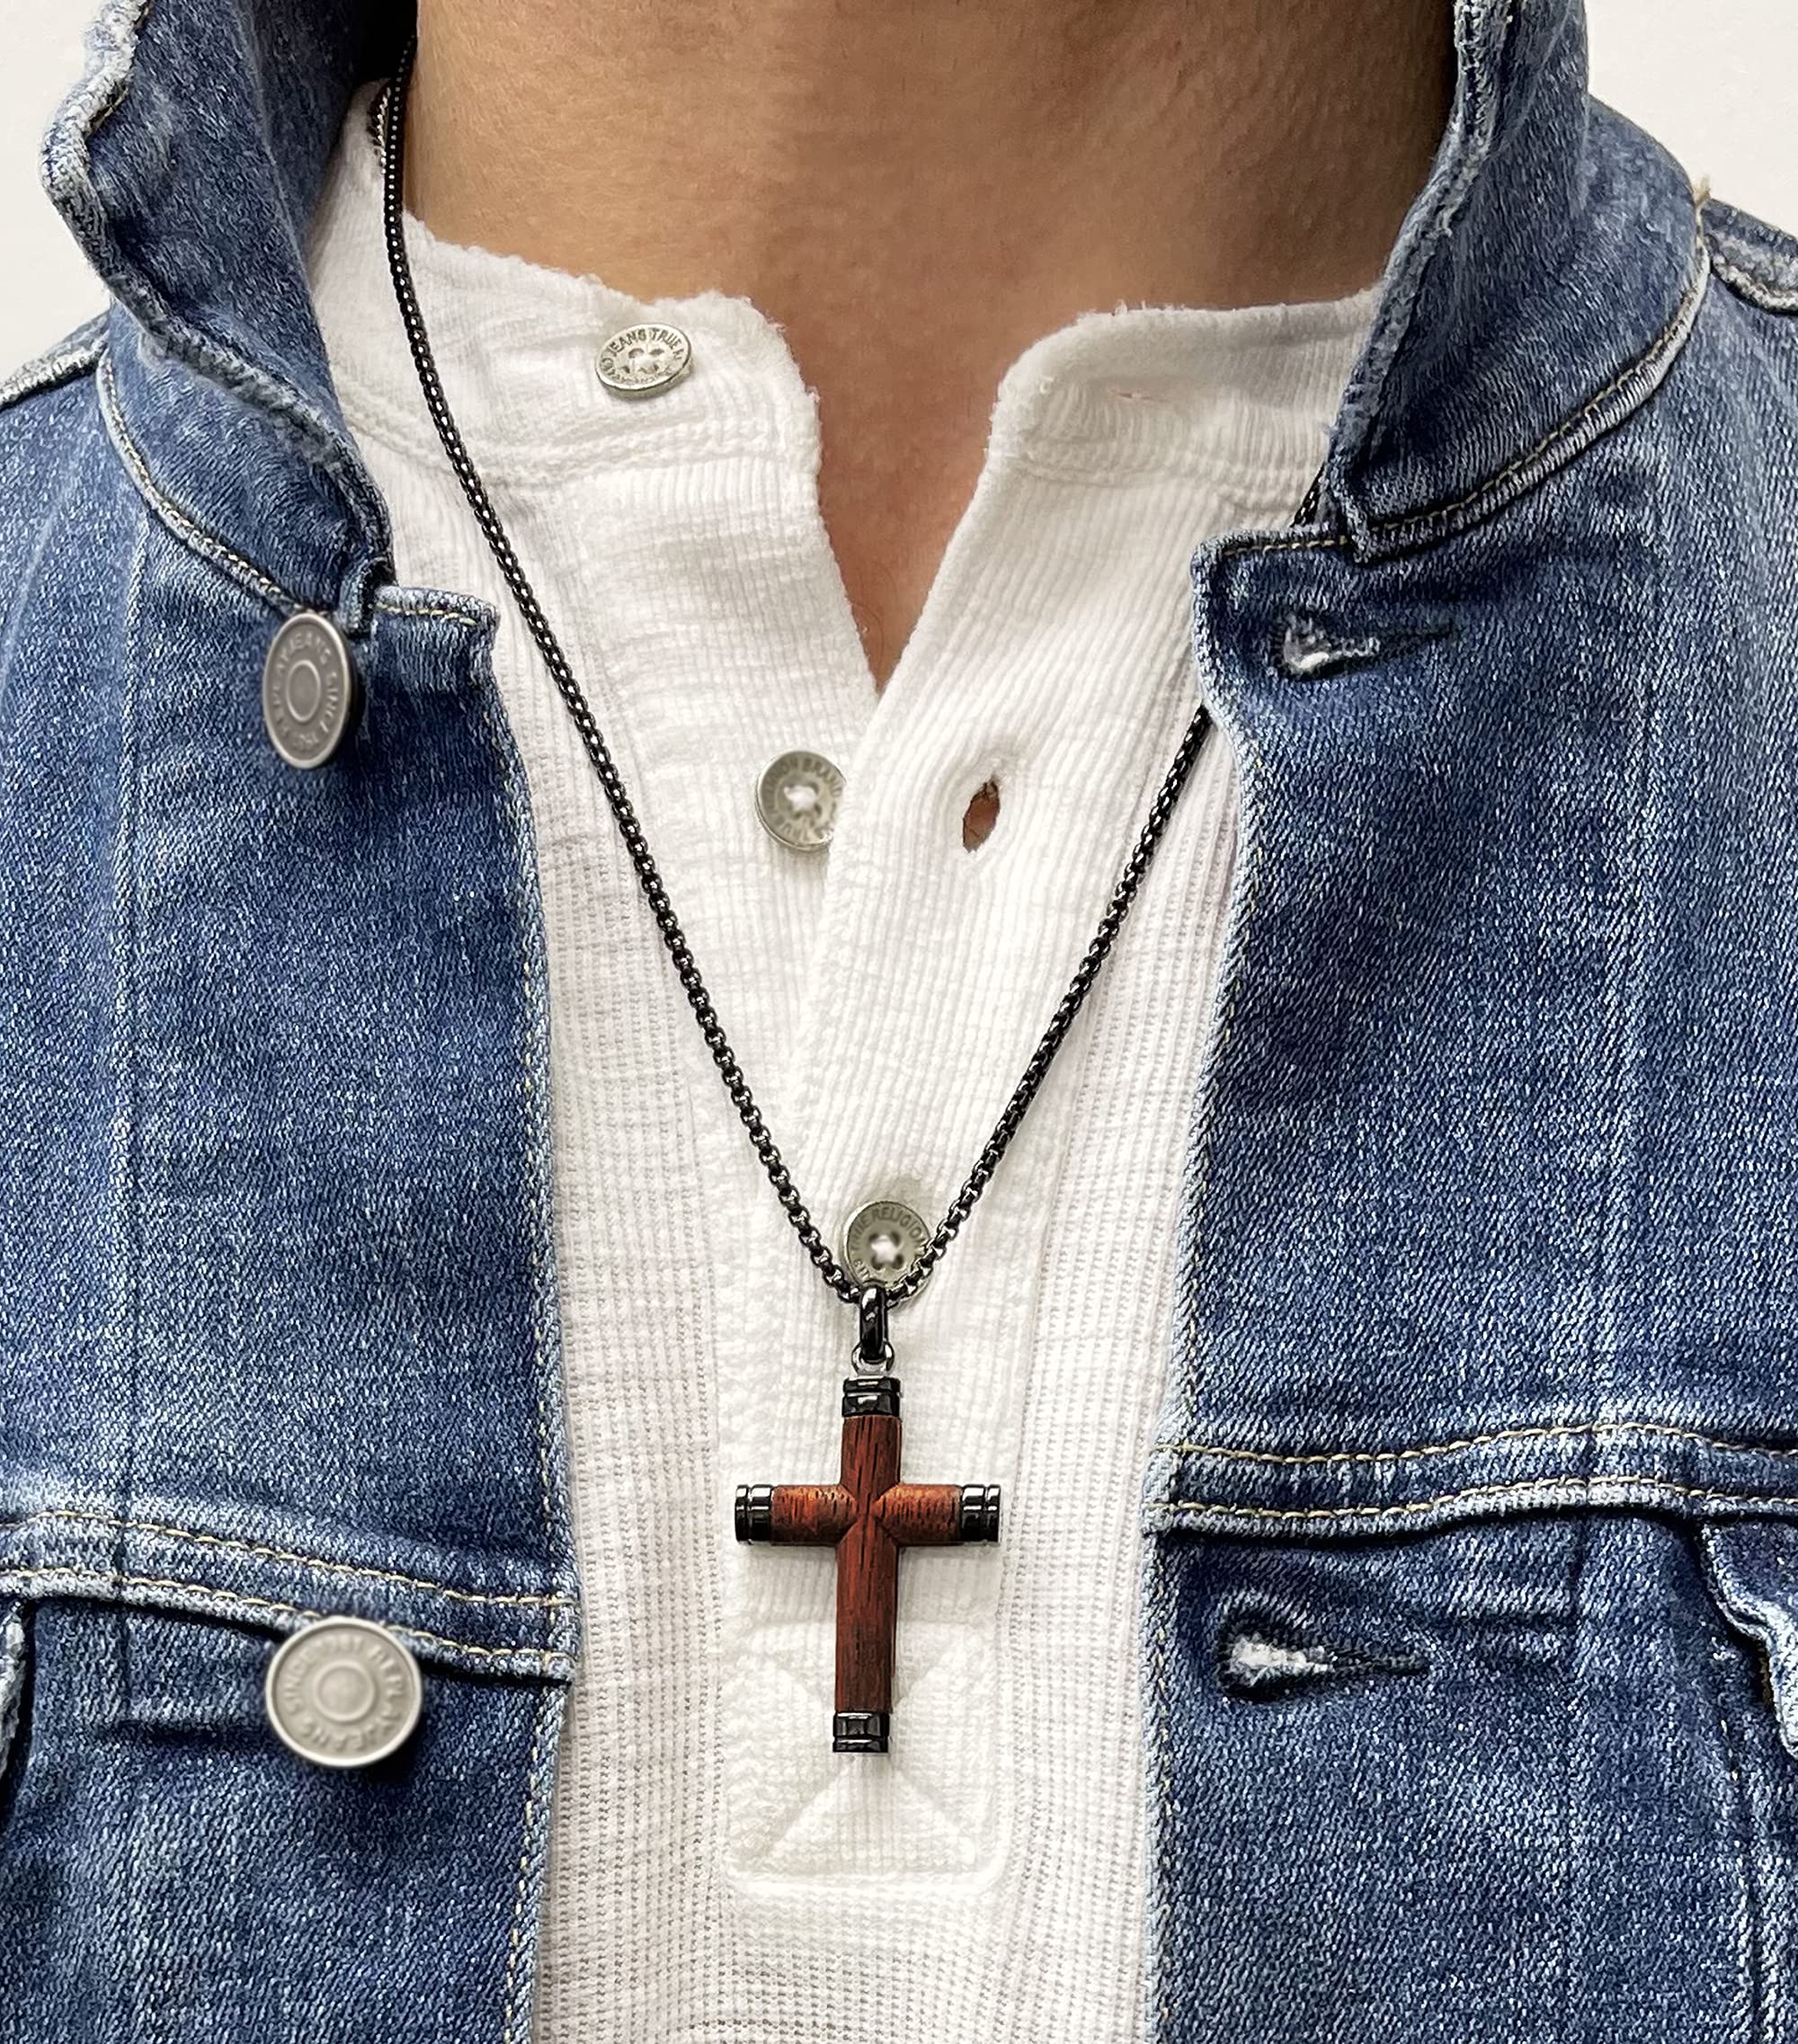 Metal Masters Co. Black Stainless Steel Cross Pendant, Real Santos Wood Free Necklace 24